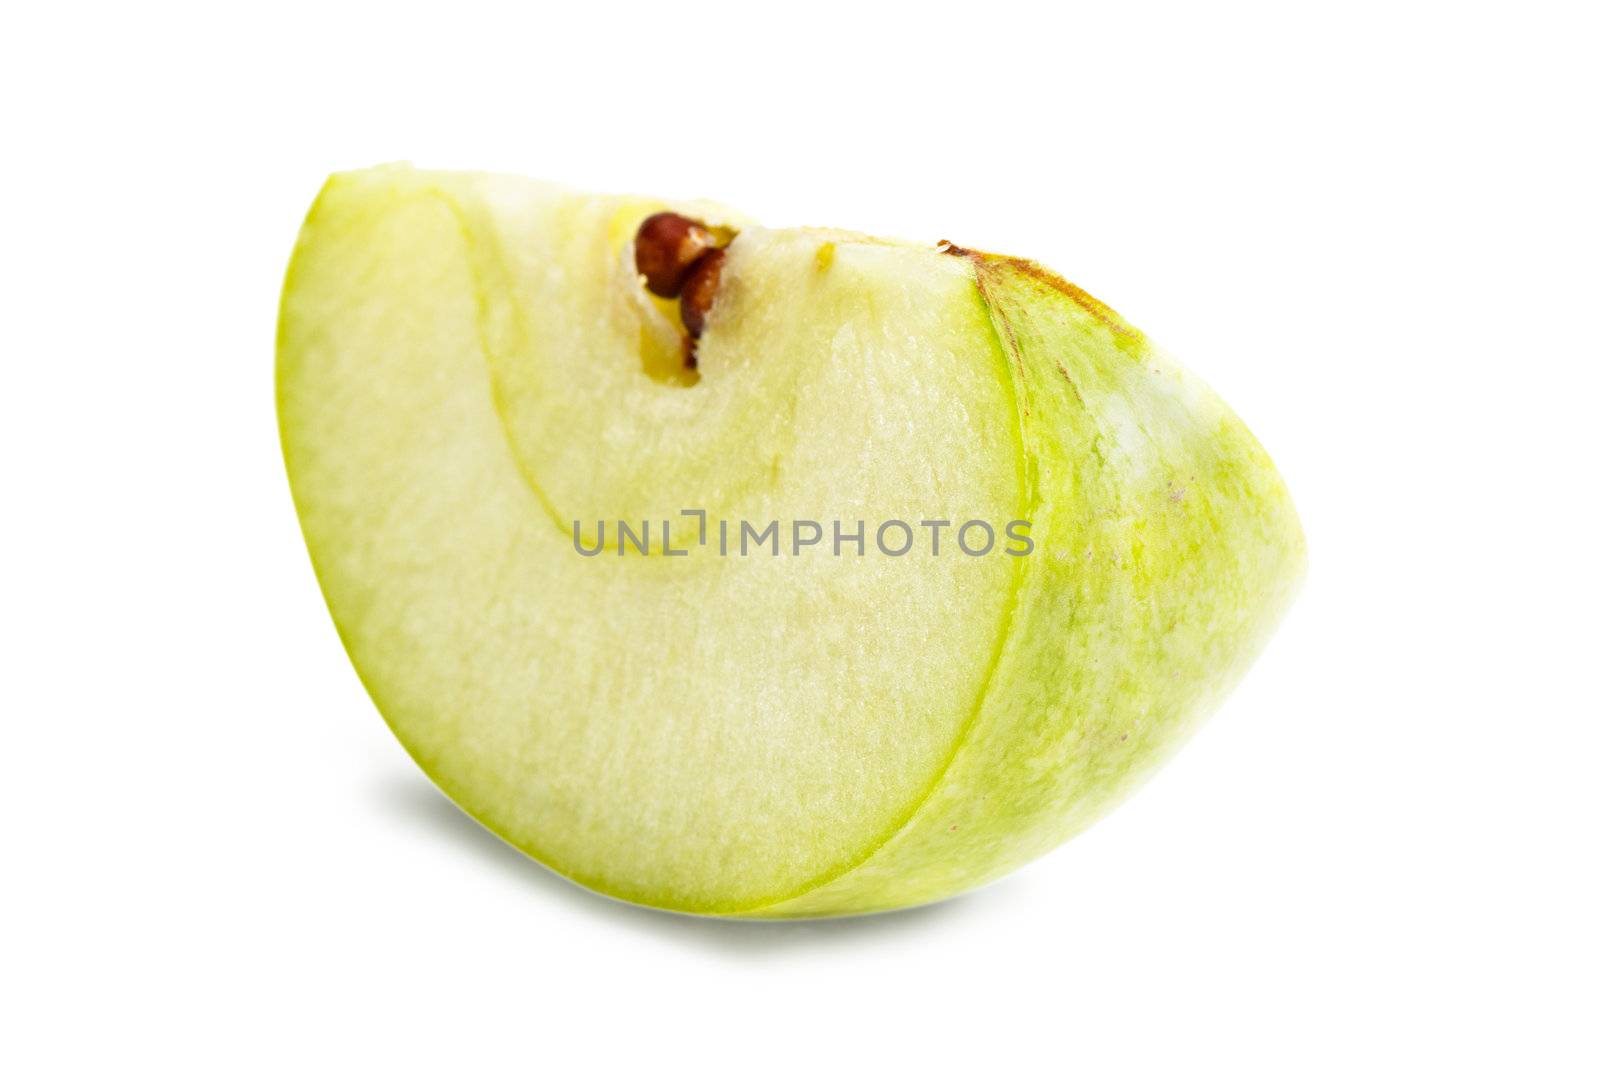 A section of big green apple over white background